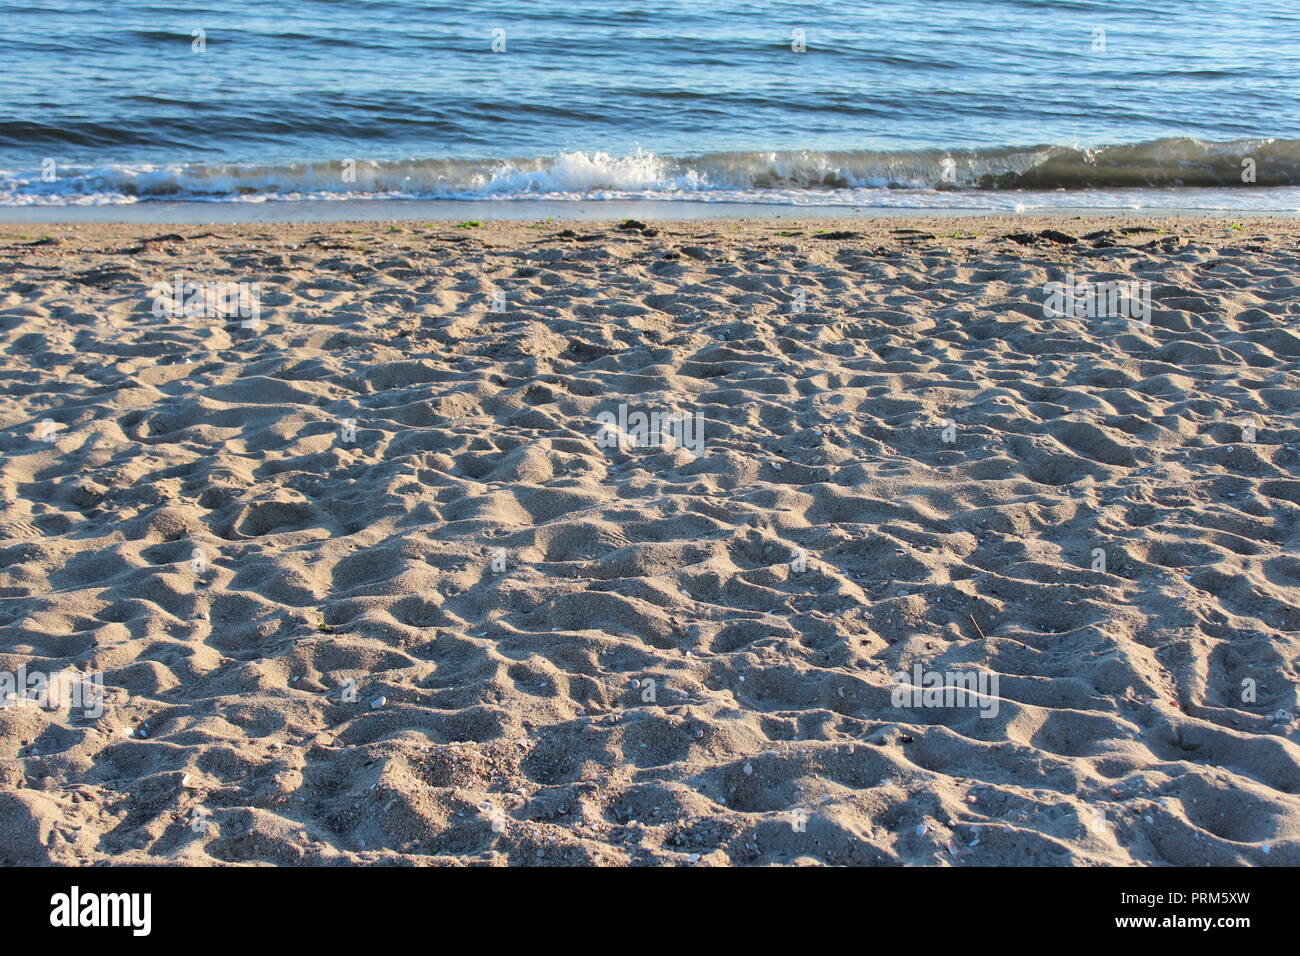 Beach with many footprints from a happy day by the shoreline.  Waves still gently lapping on the shore. Stock Photo